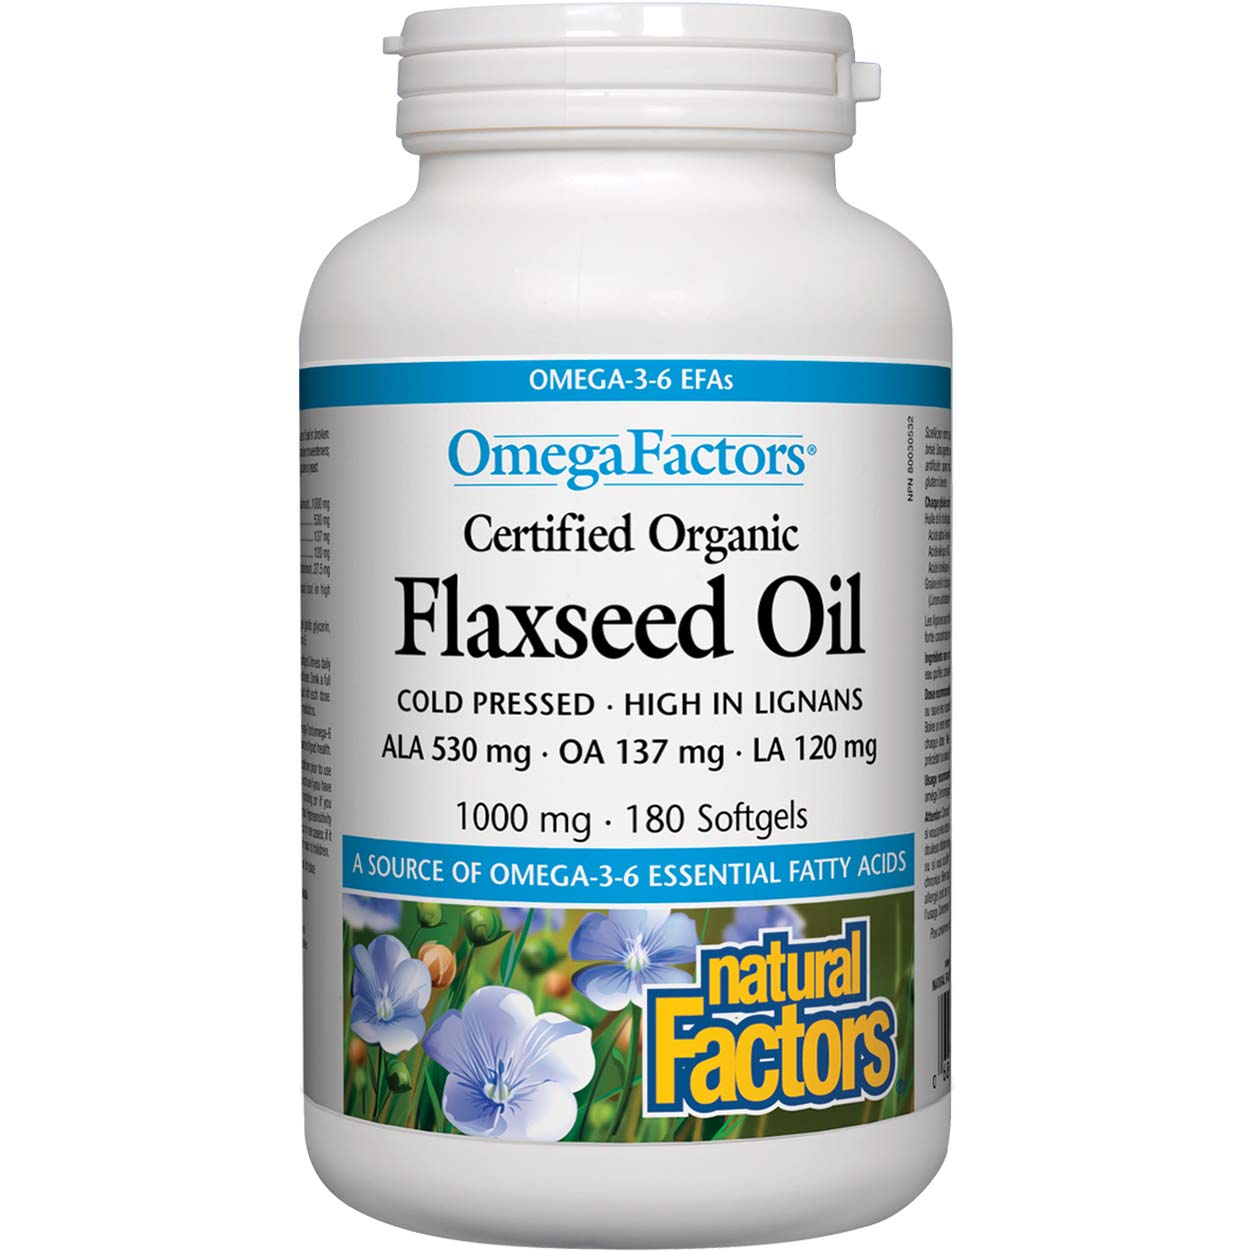 Natural Factors Flaxseed Oil Certified Organic, 1000 mg, 180 Softgels